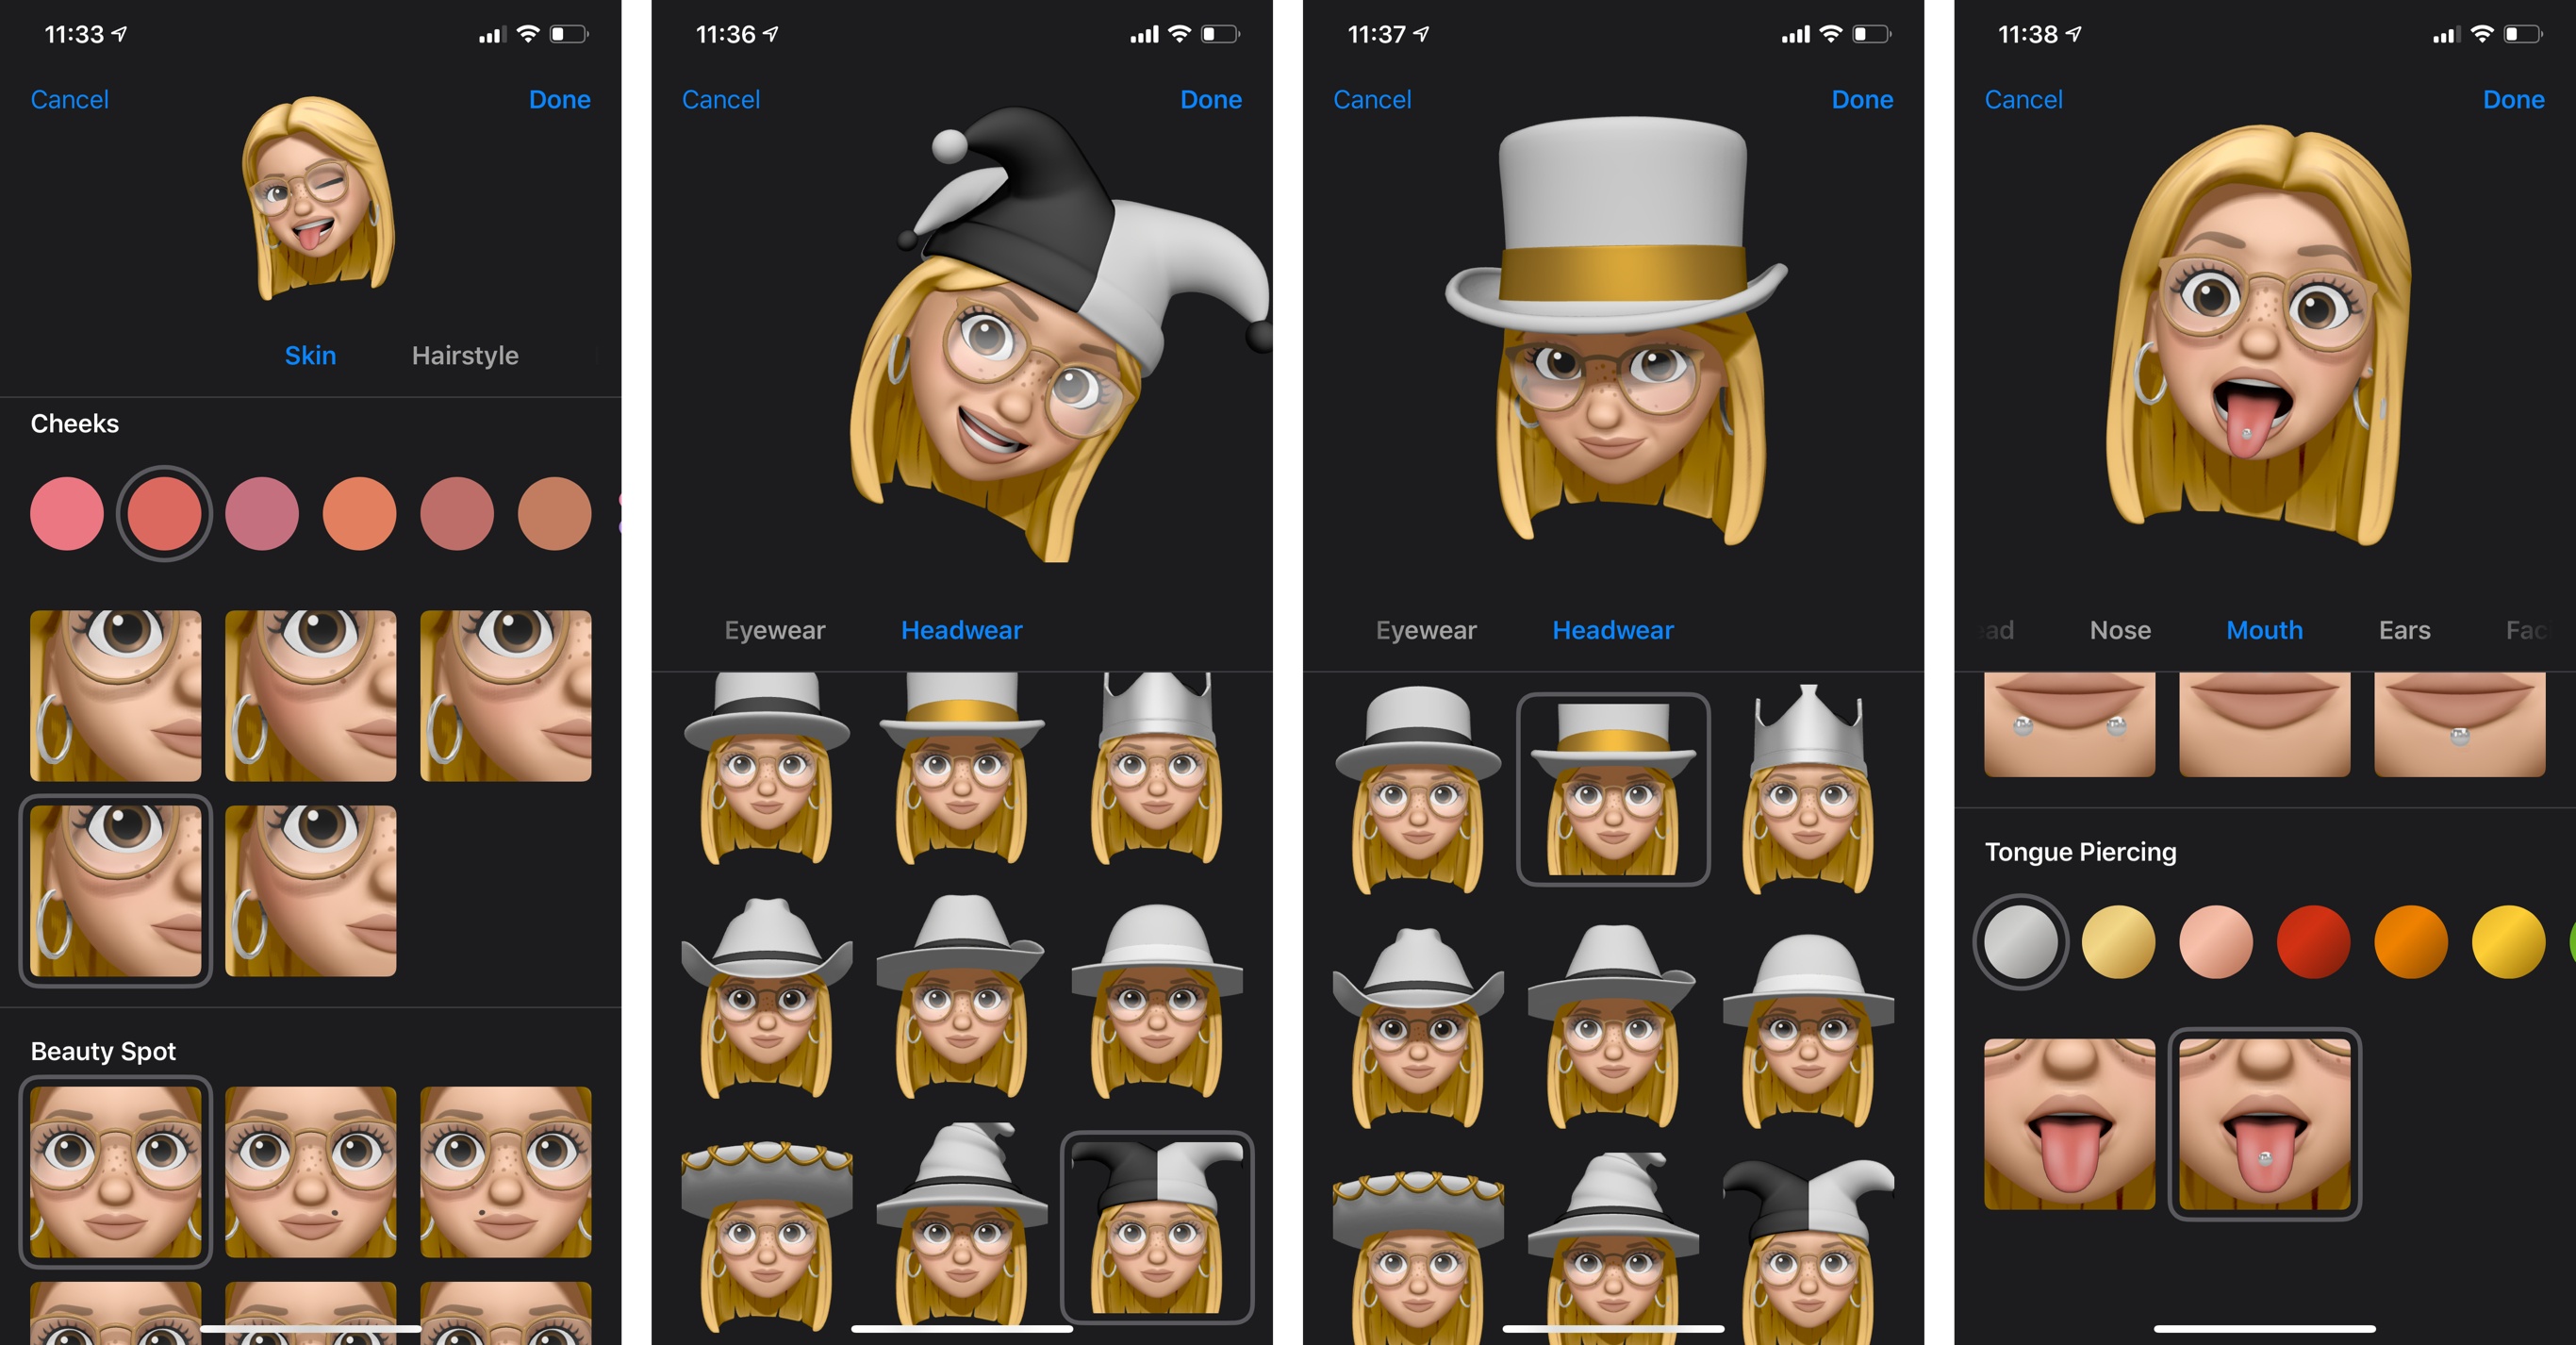 New options for Memoji creation in iOS 13, featuring Silvia.